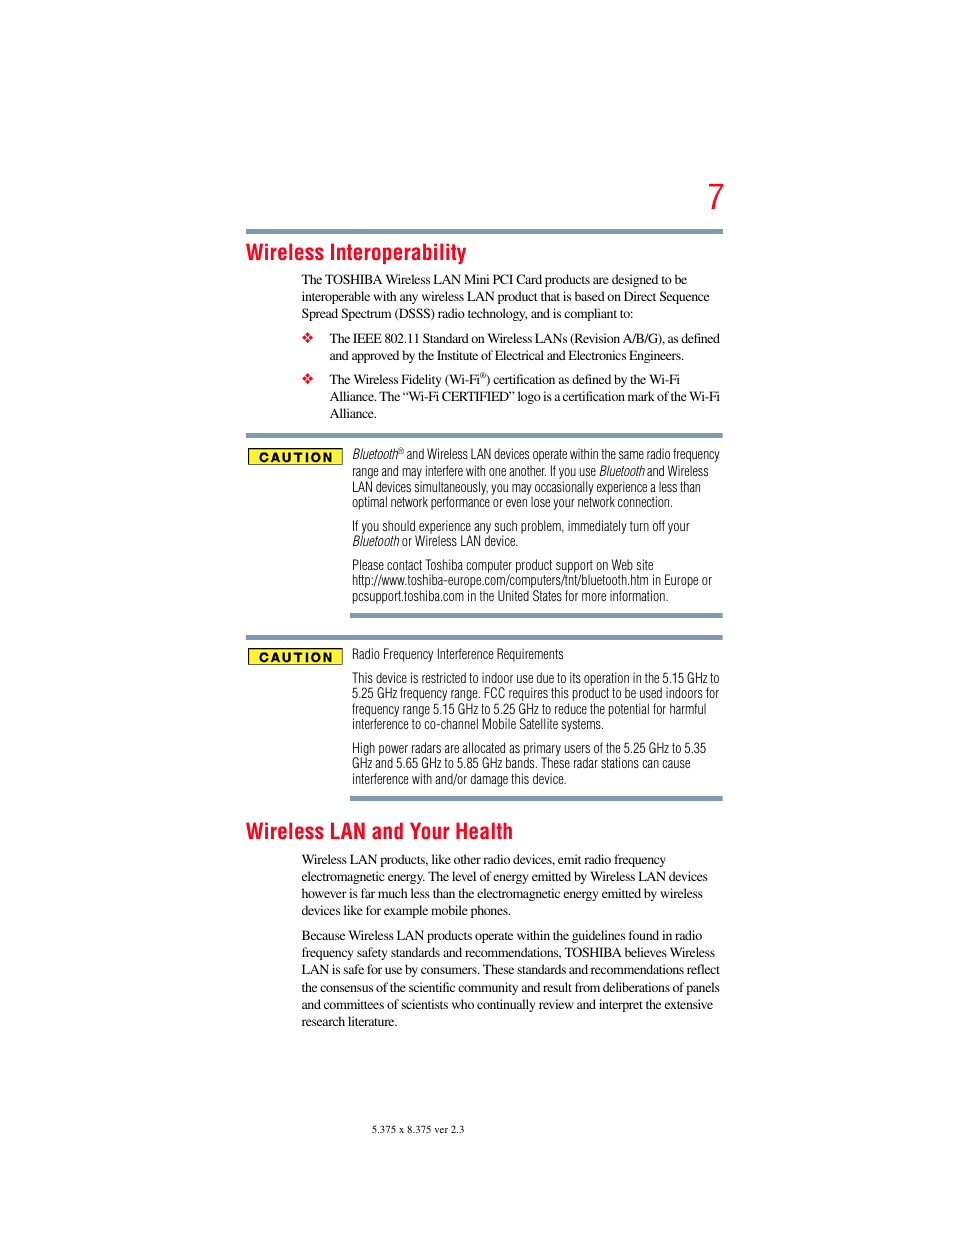 Wireless interoperability, Wireless lan and your health | Toshiba A200 User Manual | Page 7 / 244